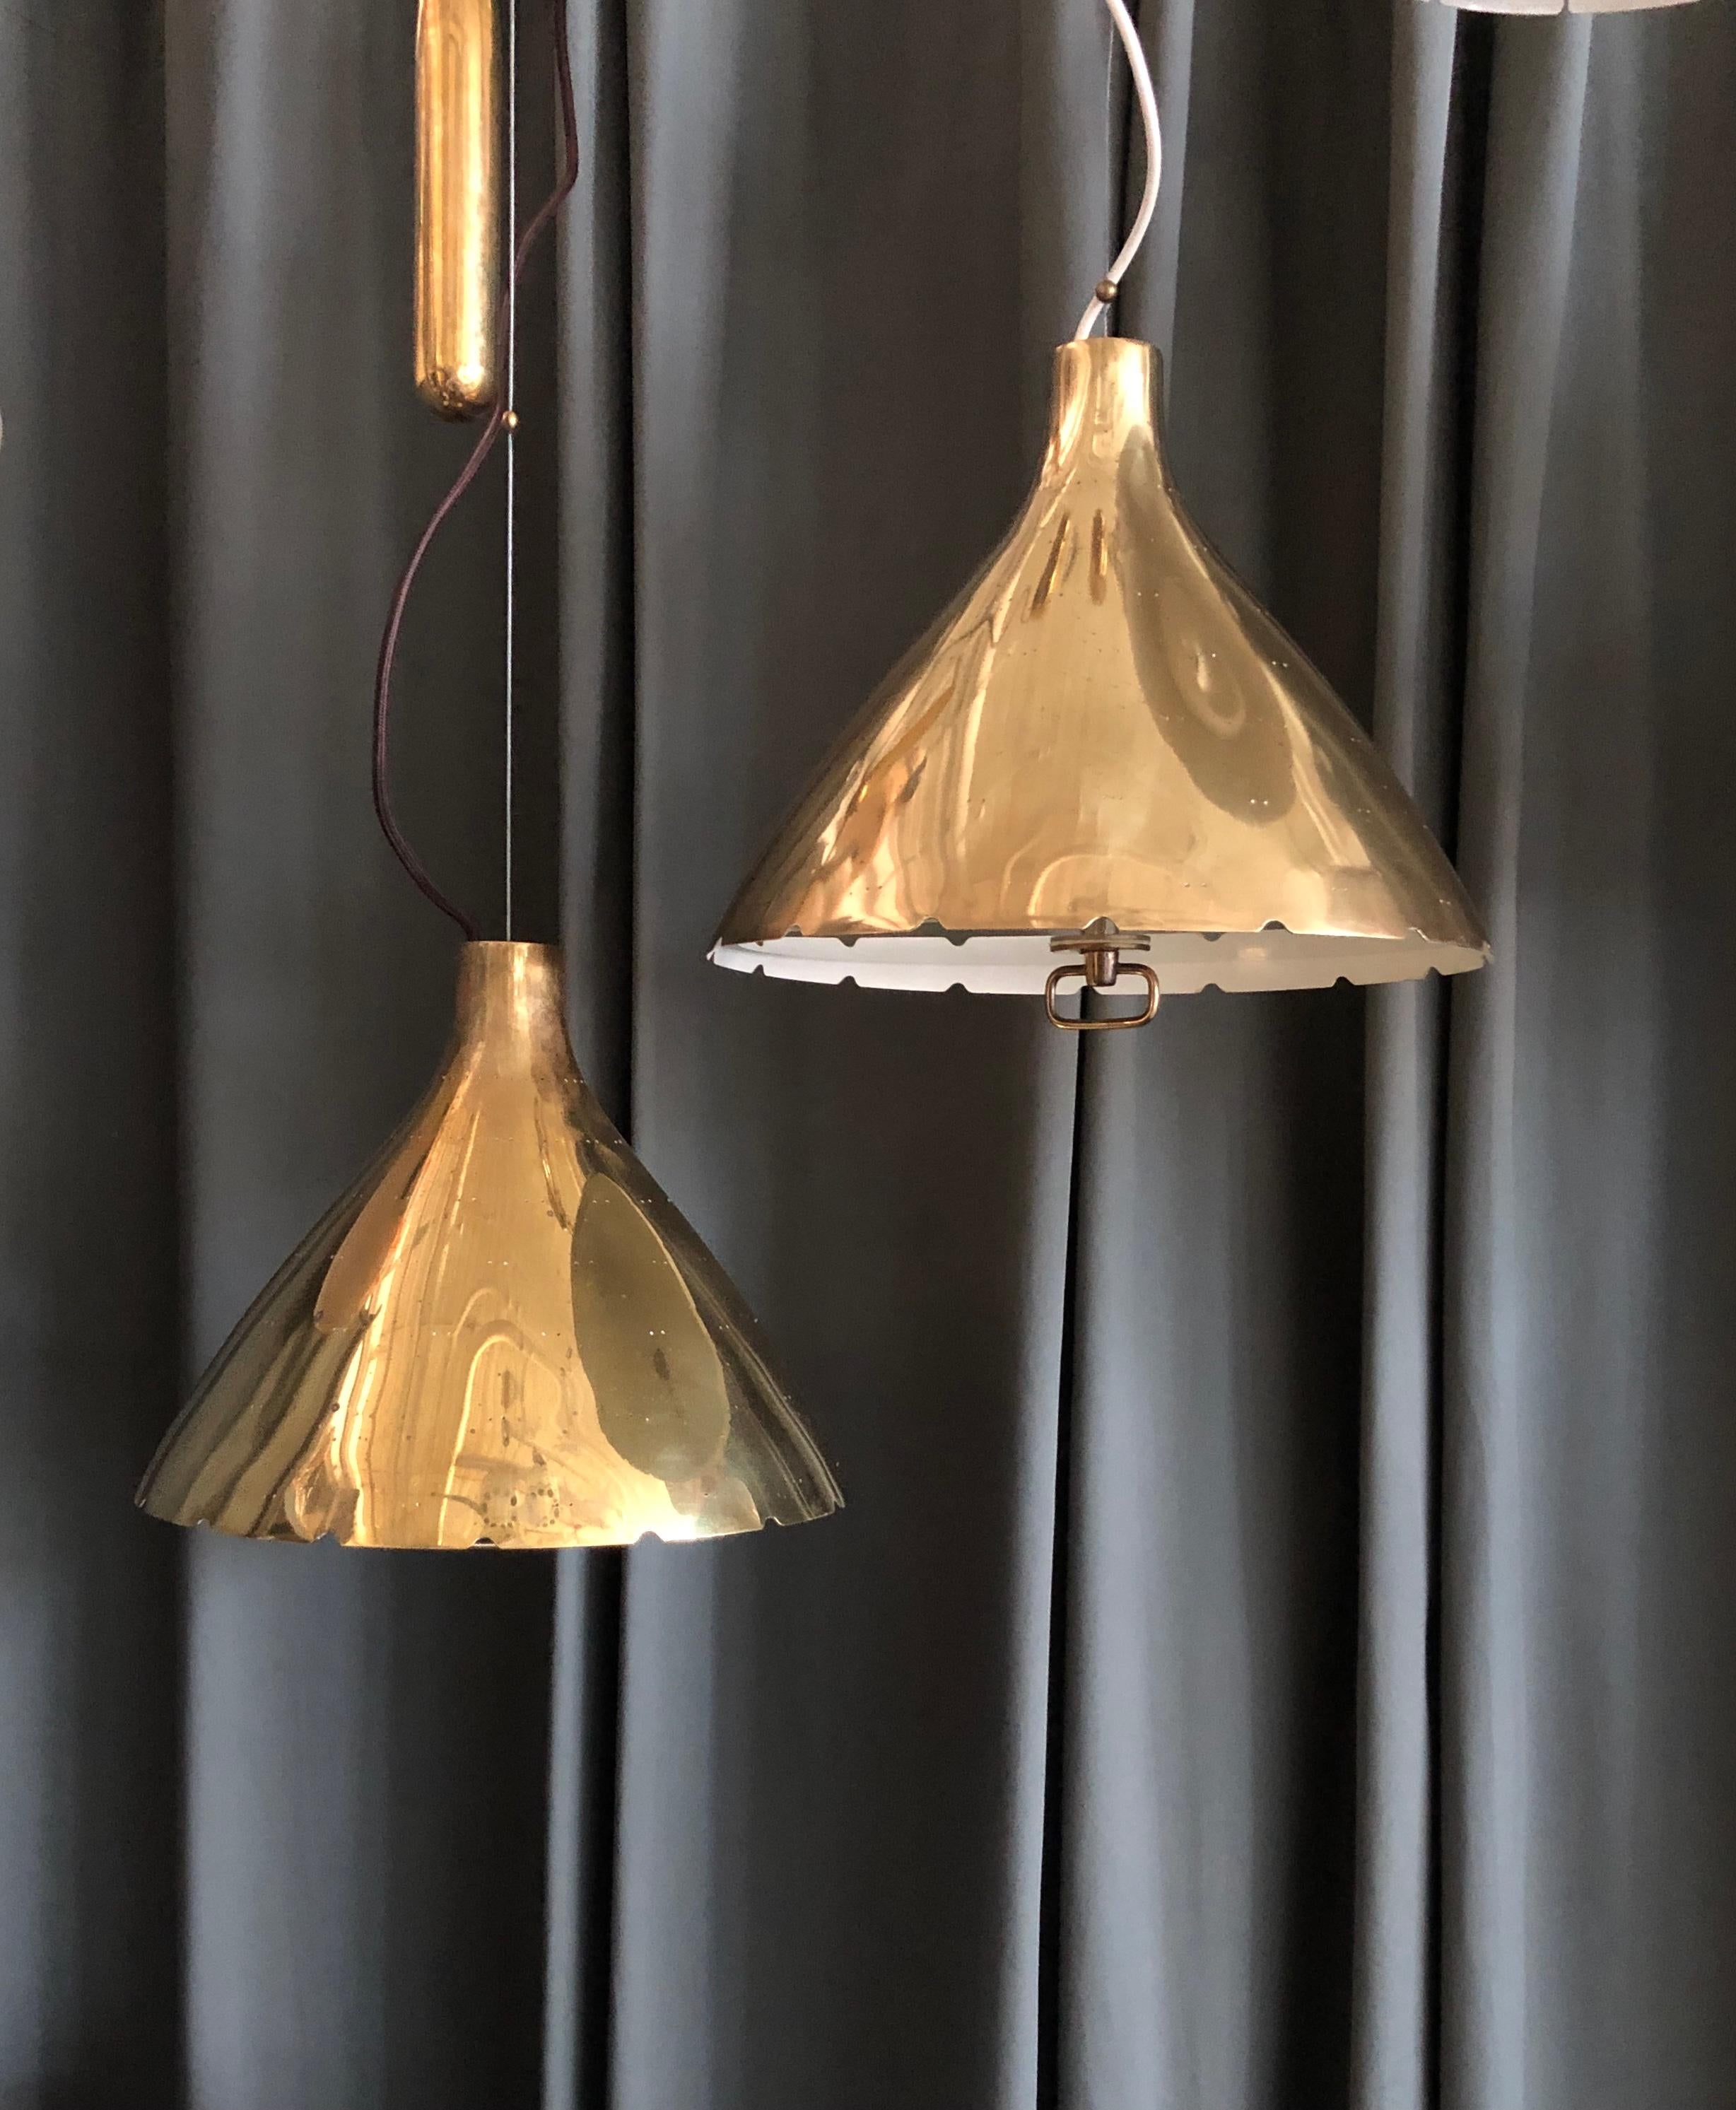 A pair of large pendants designed by Paavo Tynell for Taito Oy, Finland, circa 1950th.
Polished perforated brass shades with frosted glass defusers on counterweight.
Each fixture has 2 Edison type sockets. One fixture with brown cloth cord, the